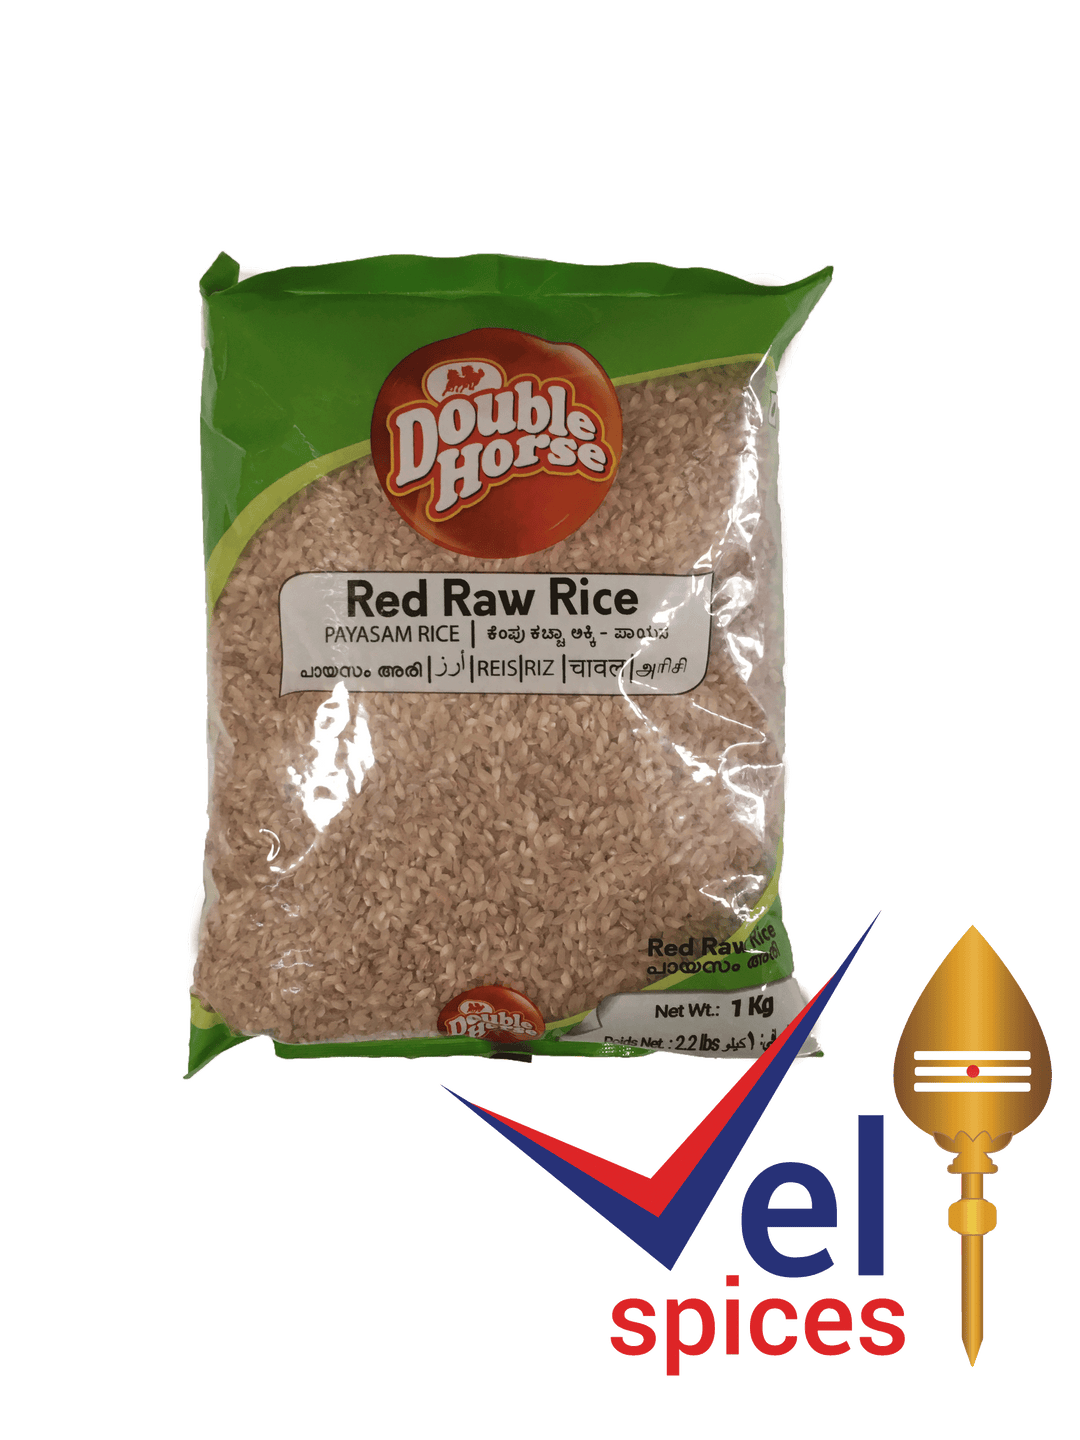 Double Horse Red Raw Rice (Payasam Rice) 1Kg